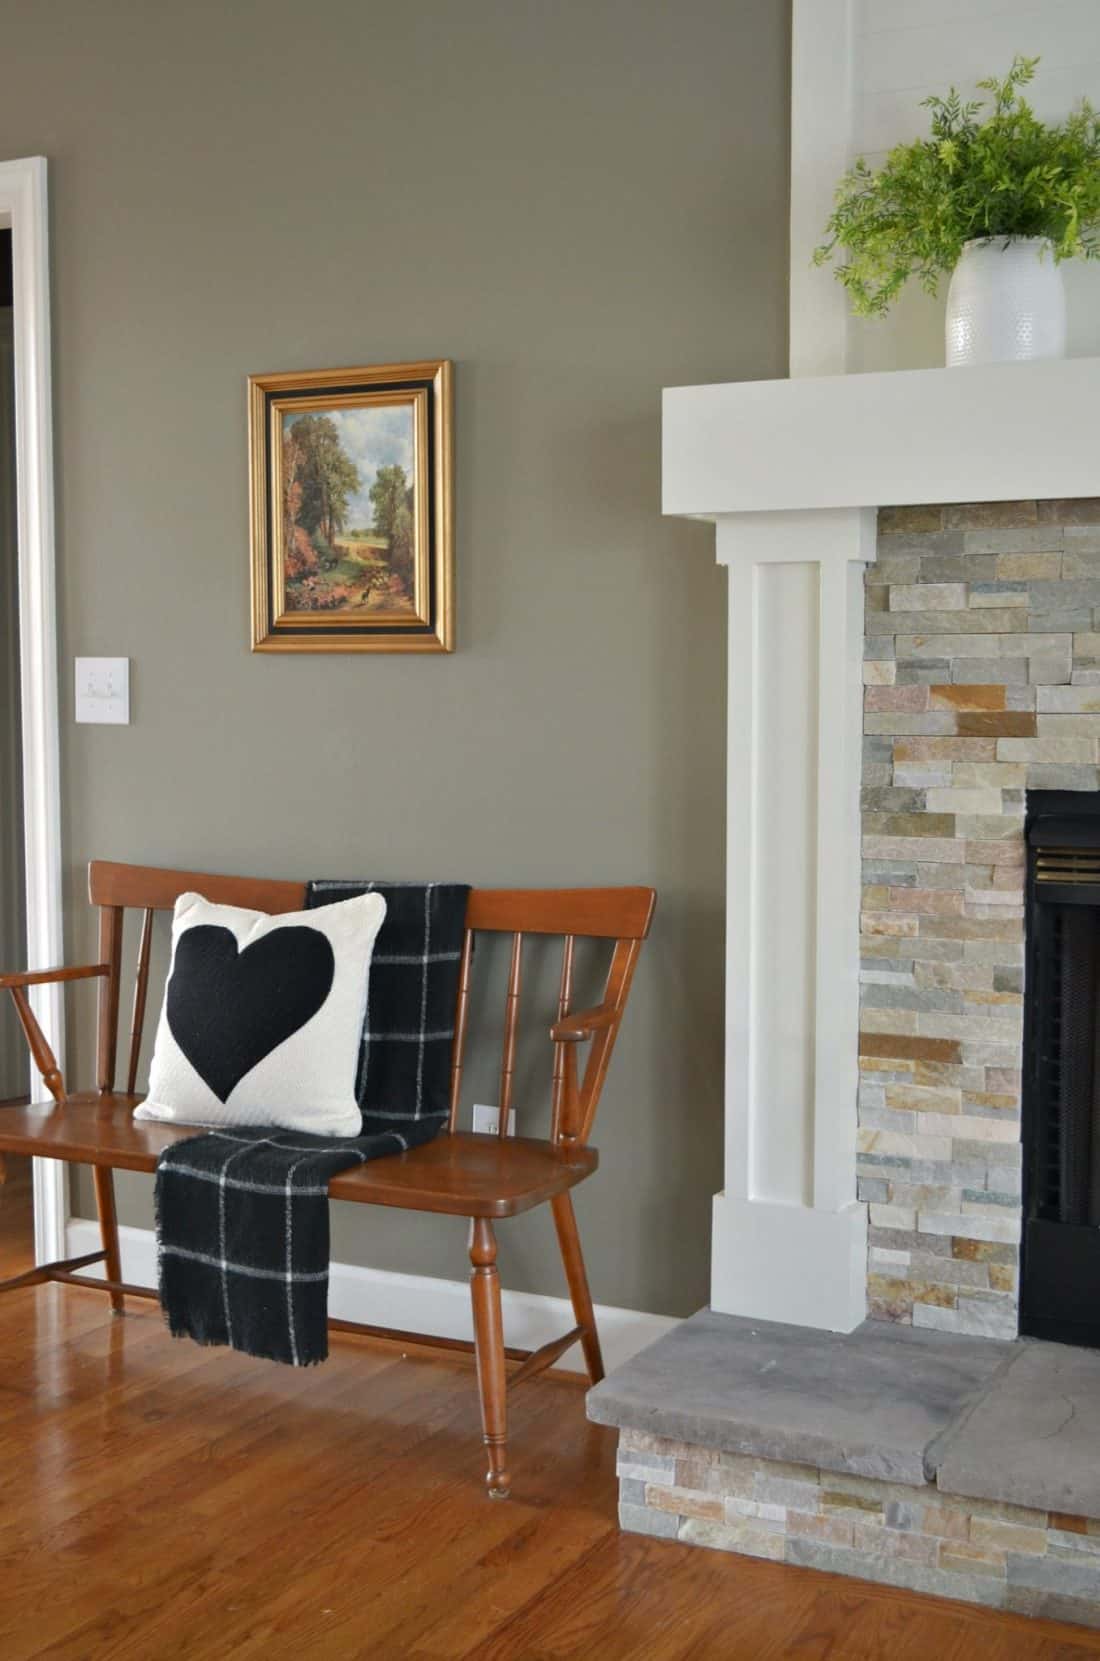 This living room makeover adds fun pieces into the decor like this heart pillow.